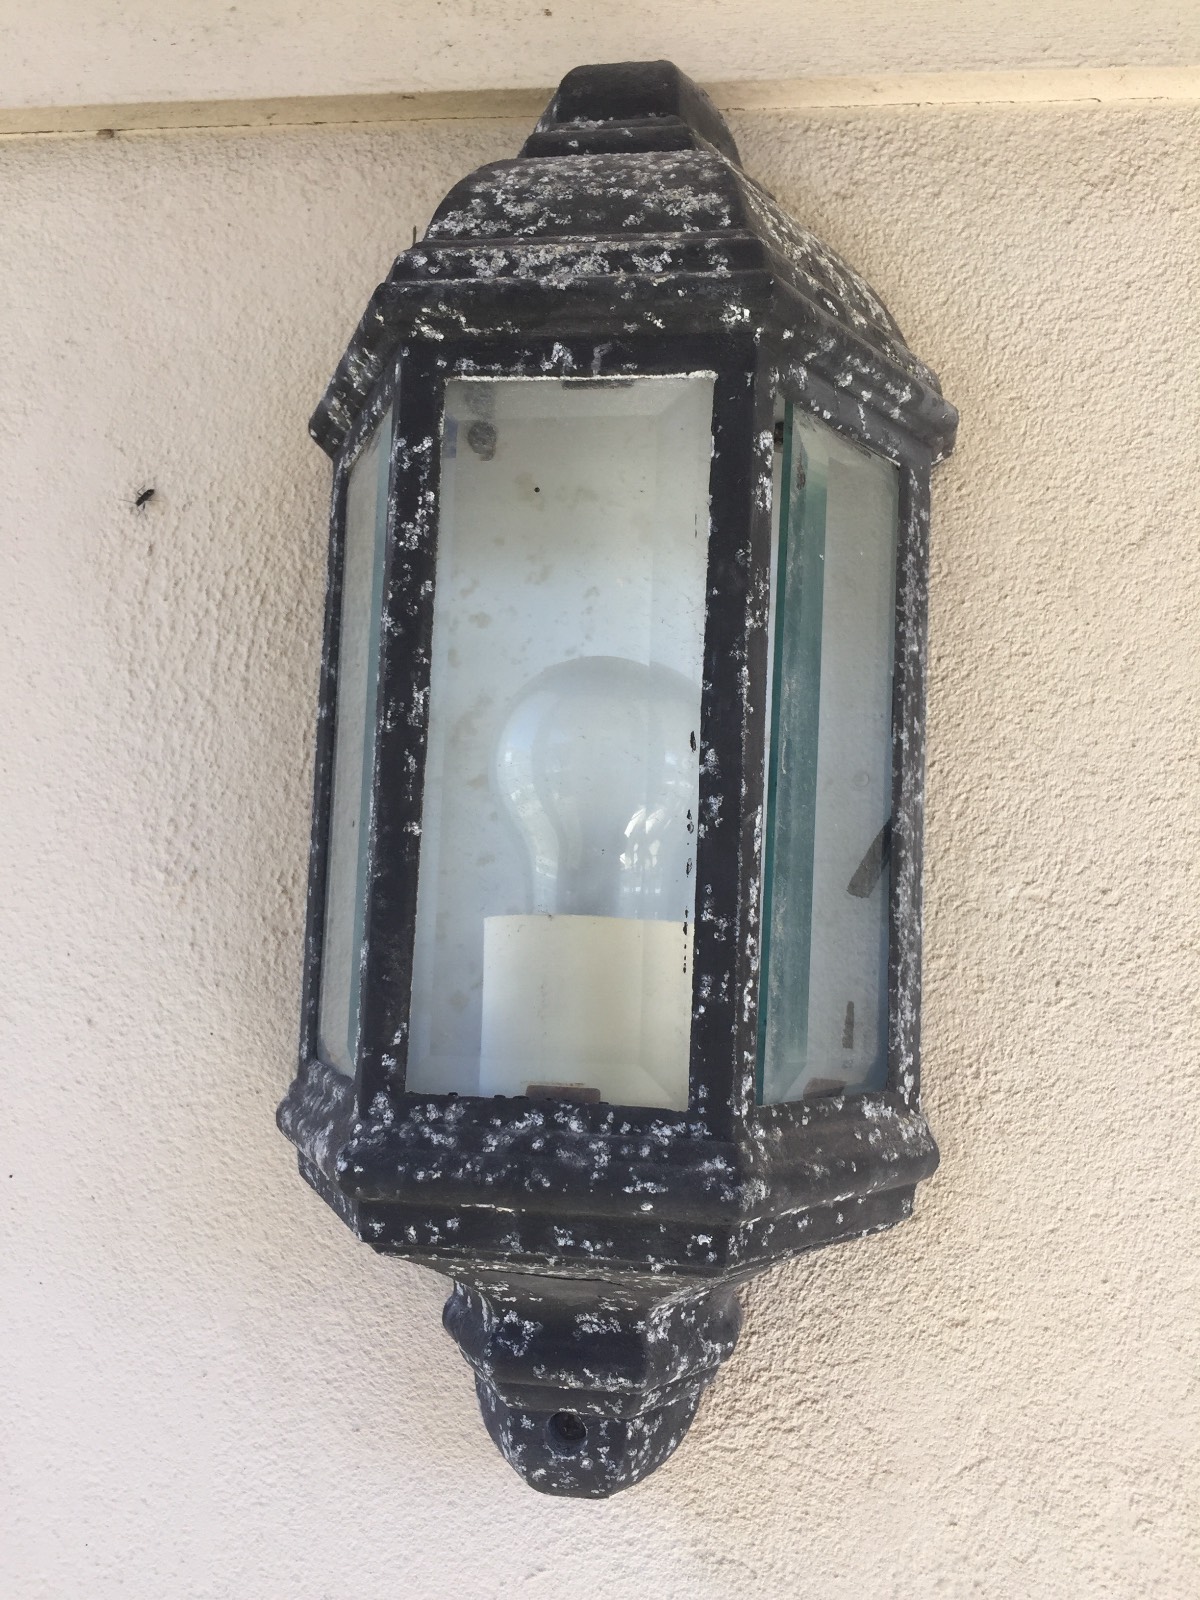 Changing a bulb outdoor light